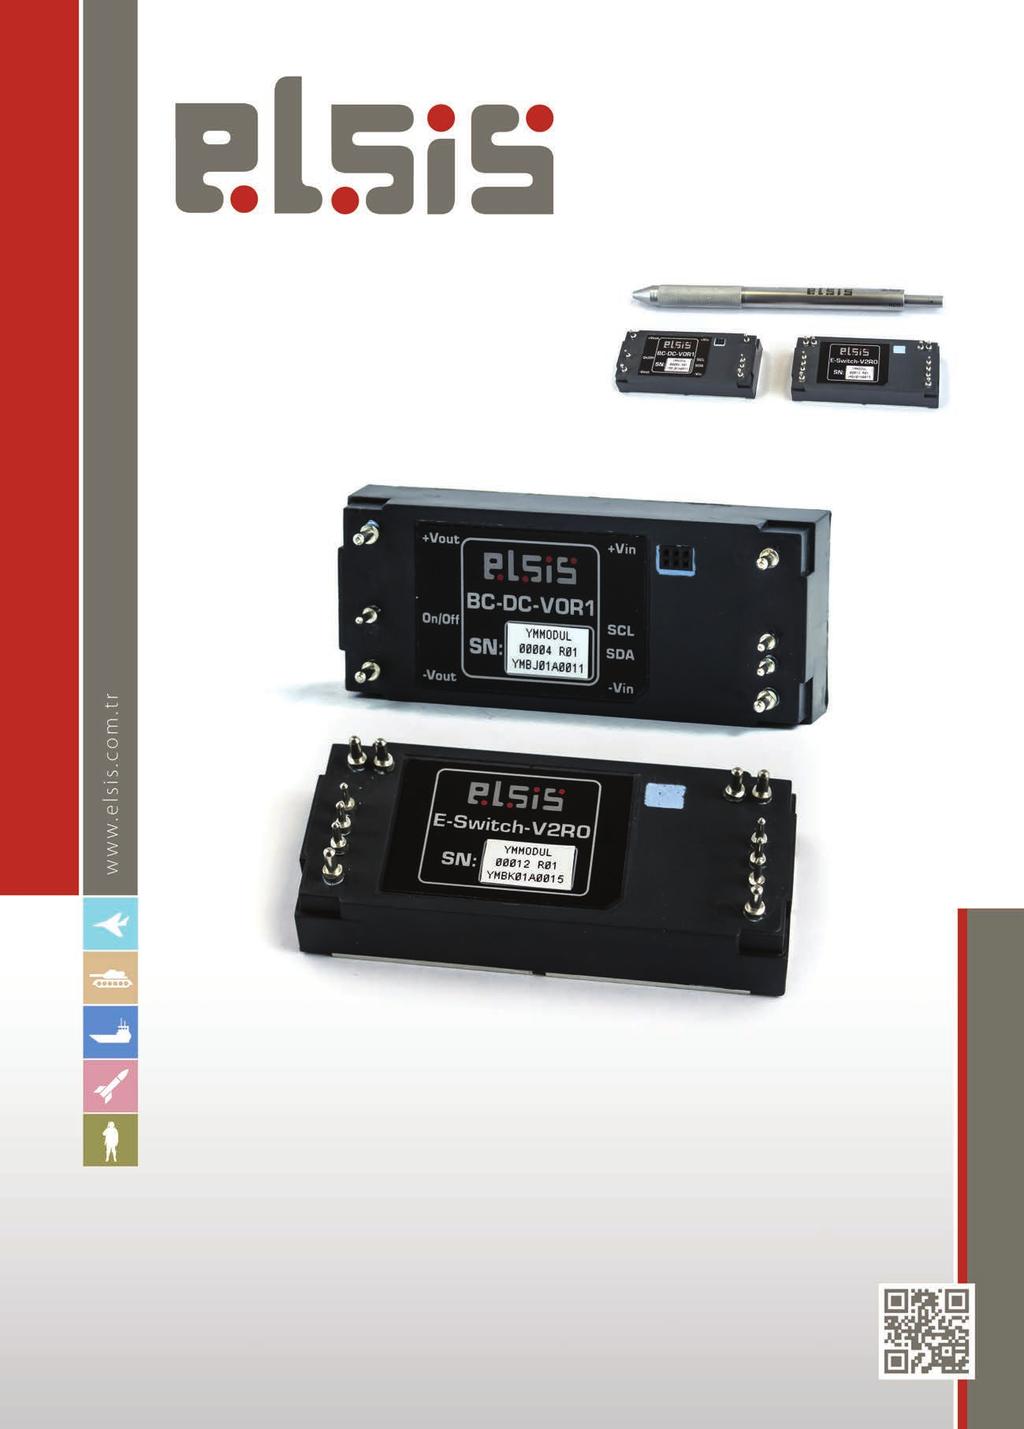 1/8 BRICK Power Modules Especially suitable for Naval use, 19 Rack Type, with IP- 67 protection class.